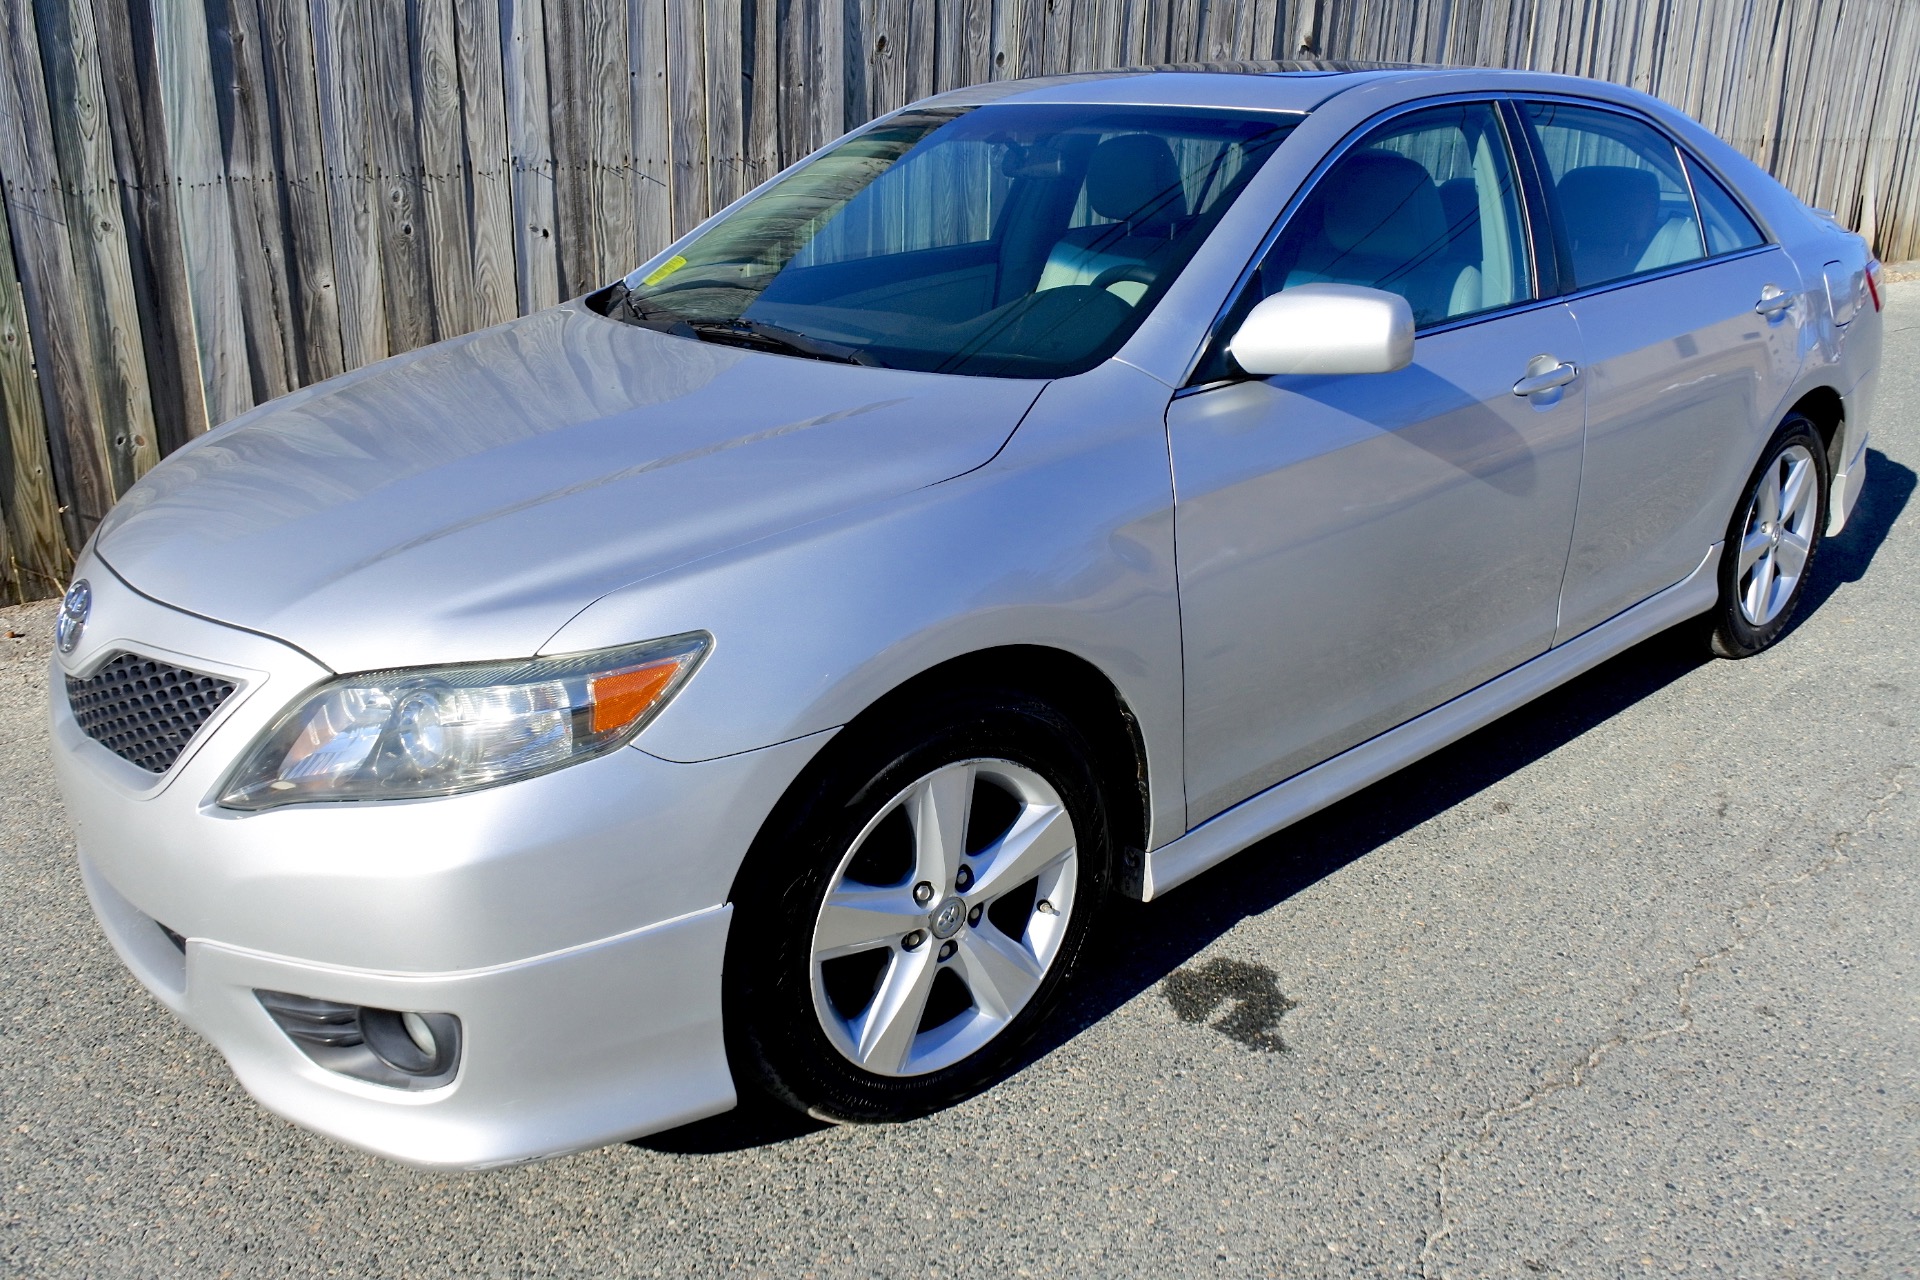 Used 2010 Toyota Camry V6 SE For Sale 7 900 Metro West Motorcars 